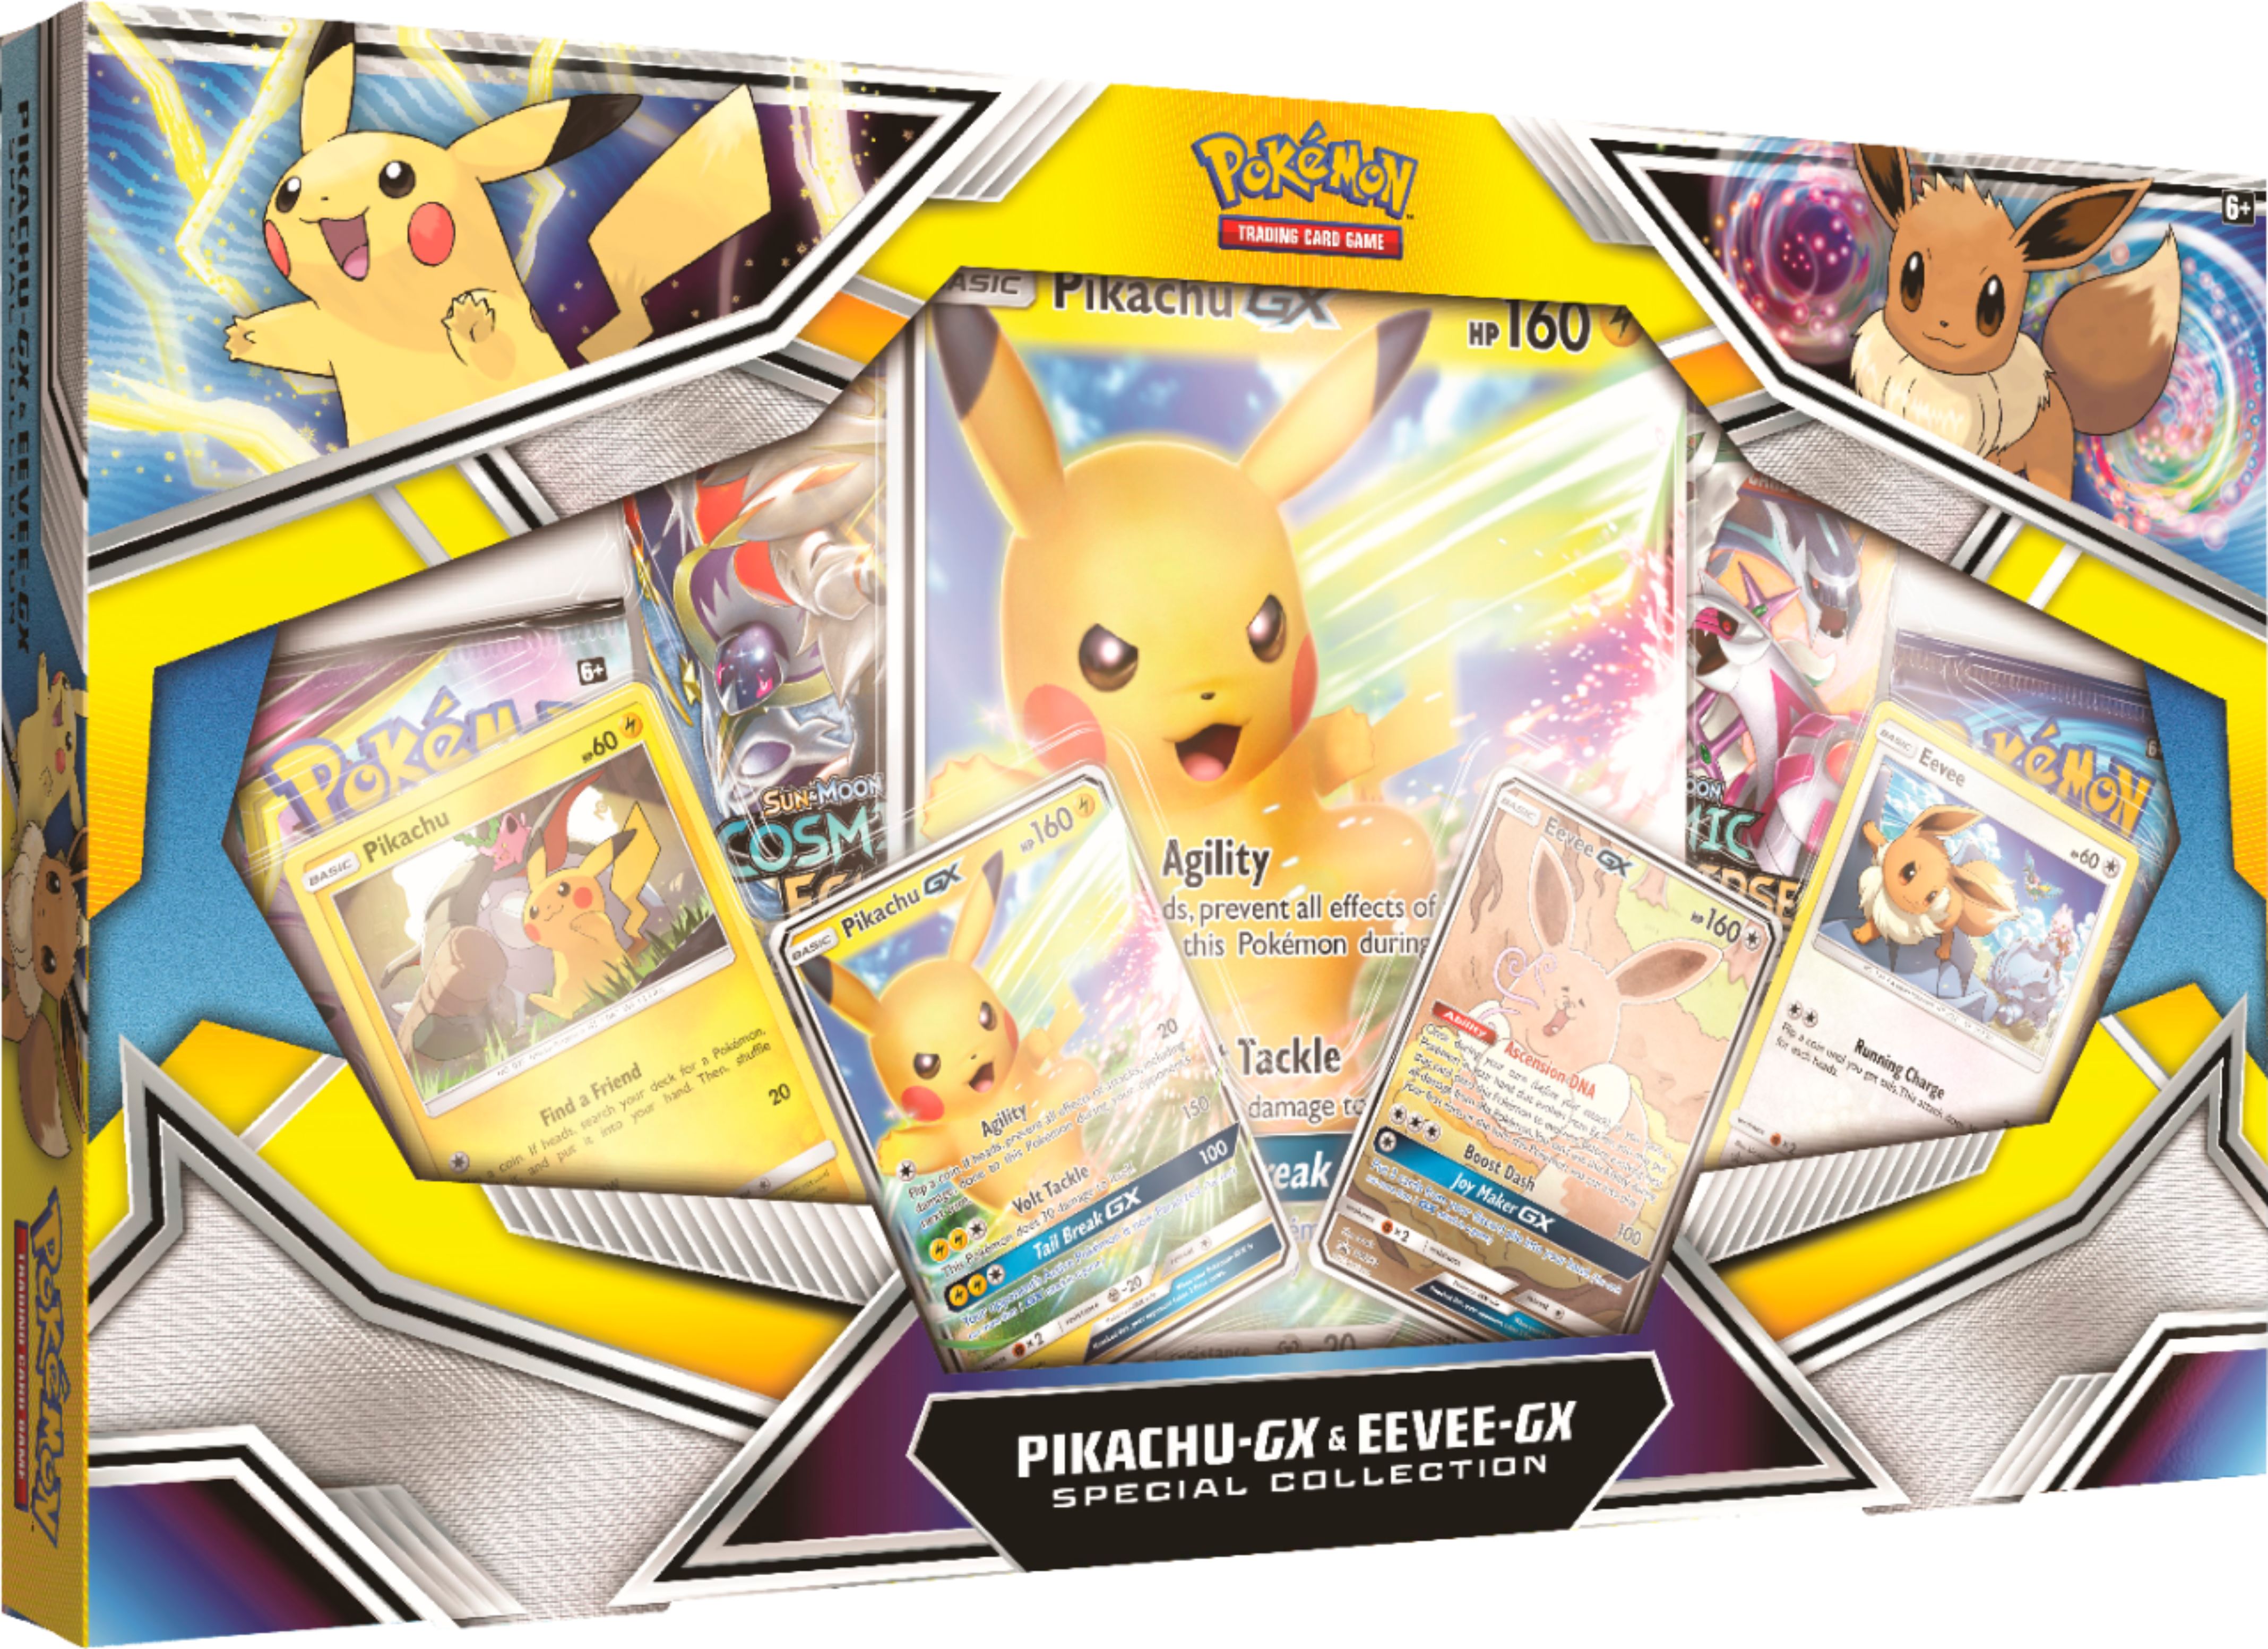 Pokémon Trading Card Game: Pikachu-GX & Eevee-GX Special Collection 82777 -  Best Buy